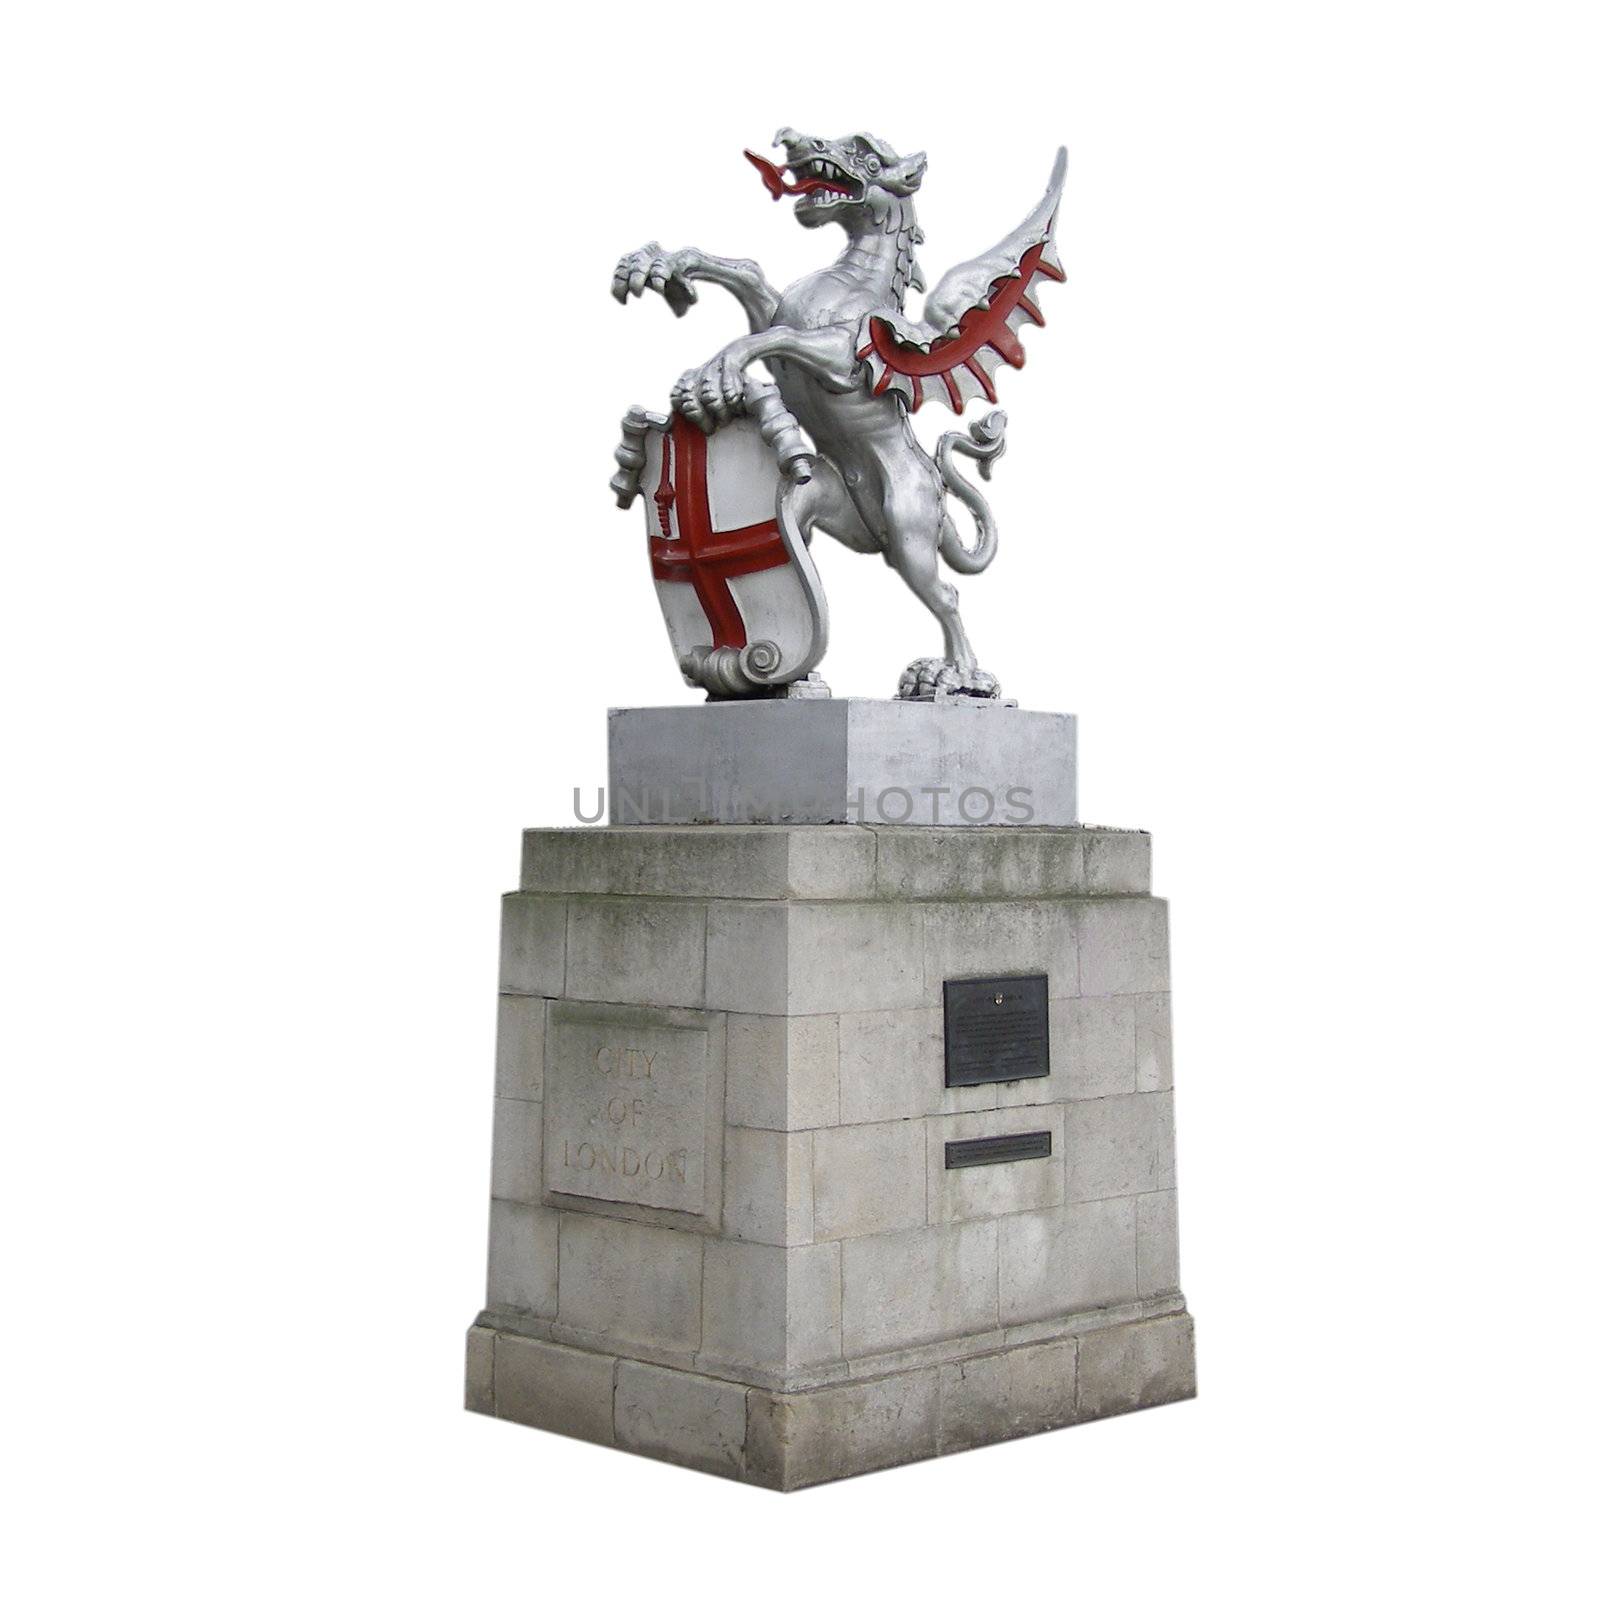 St George with the dragon, symbol of England and London